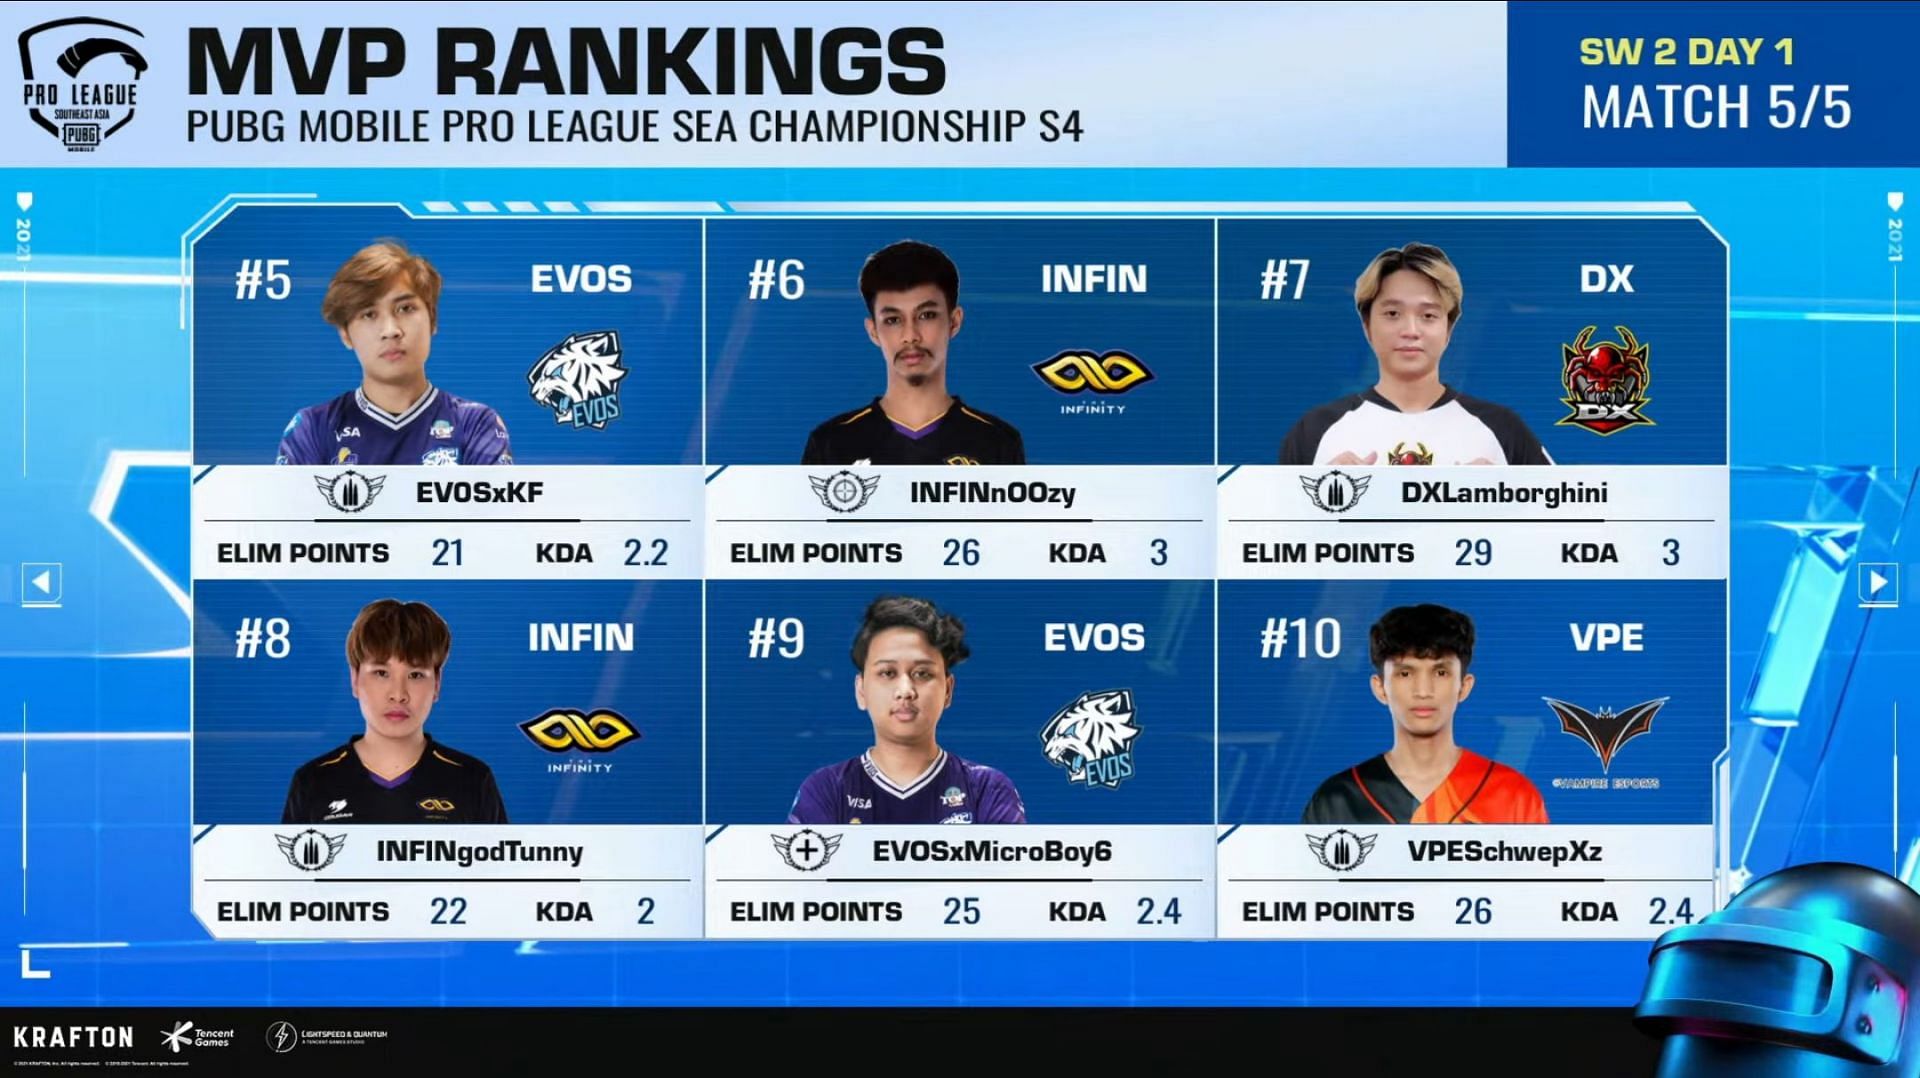 Evos KF leads the MVP ranking after the PMPL SEA SW 2 Day 1